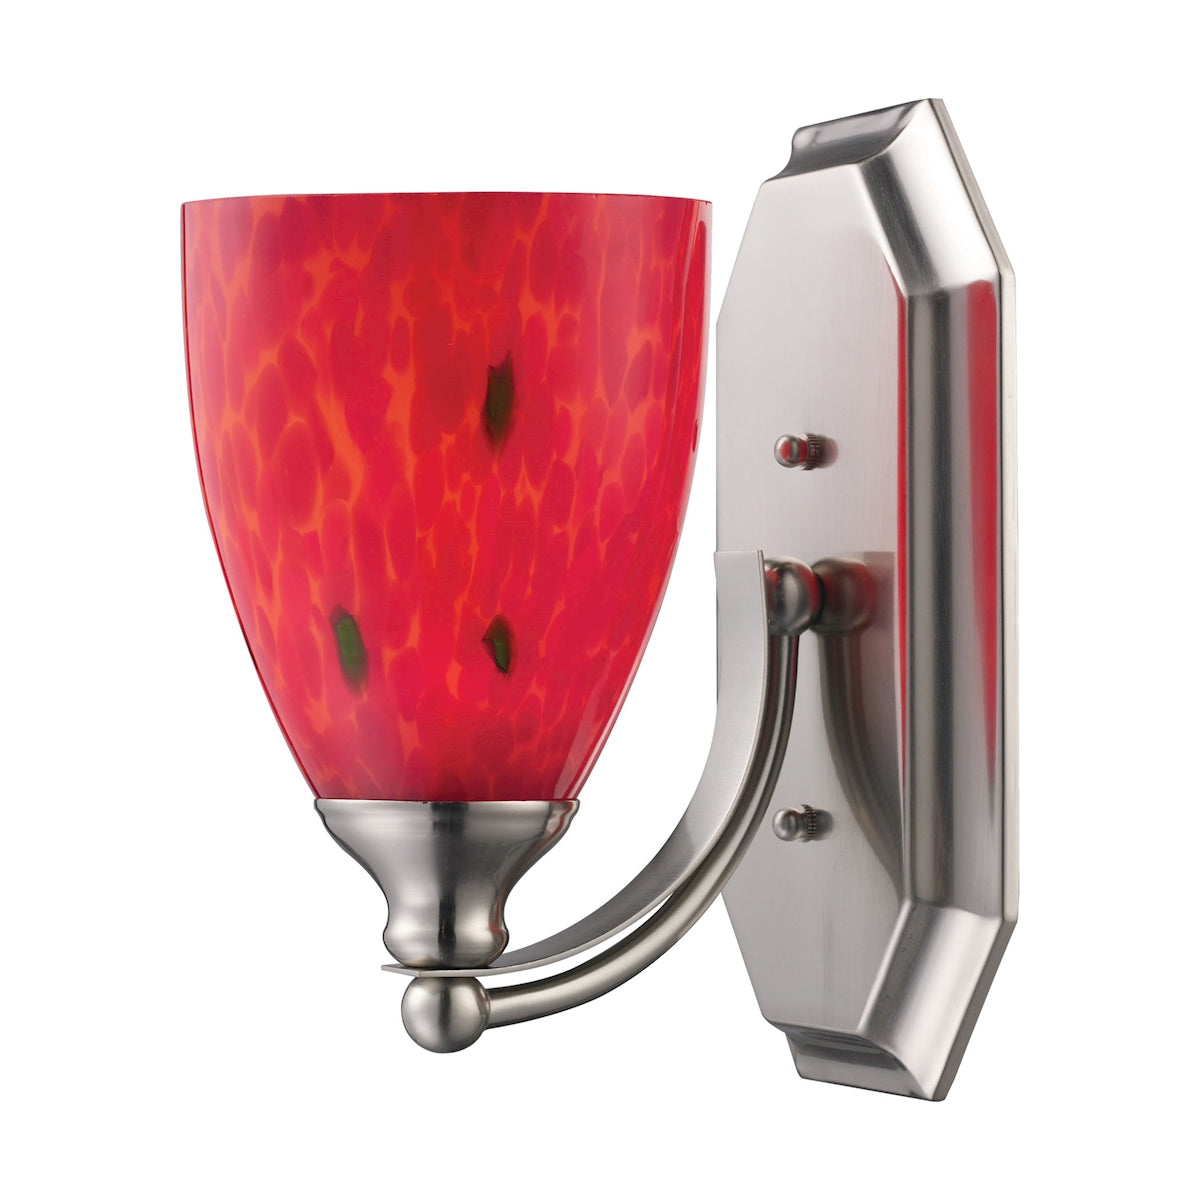 ELK Lighting 570-1N-FR Mix-N-Match Vanity 1-Light Wall Lamp in Satin Nickel with Fire Red Glass